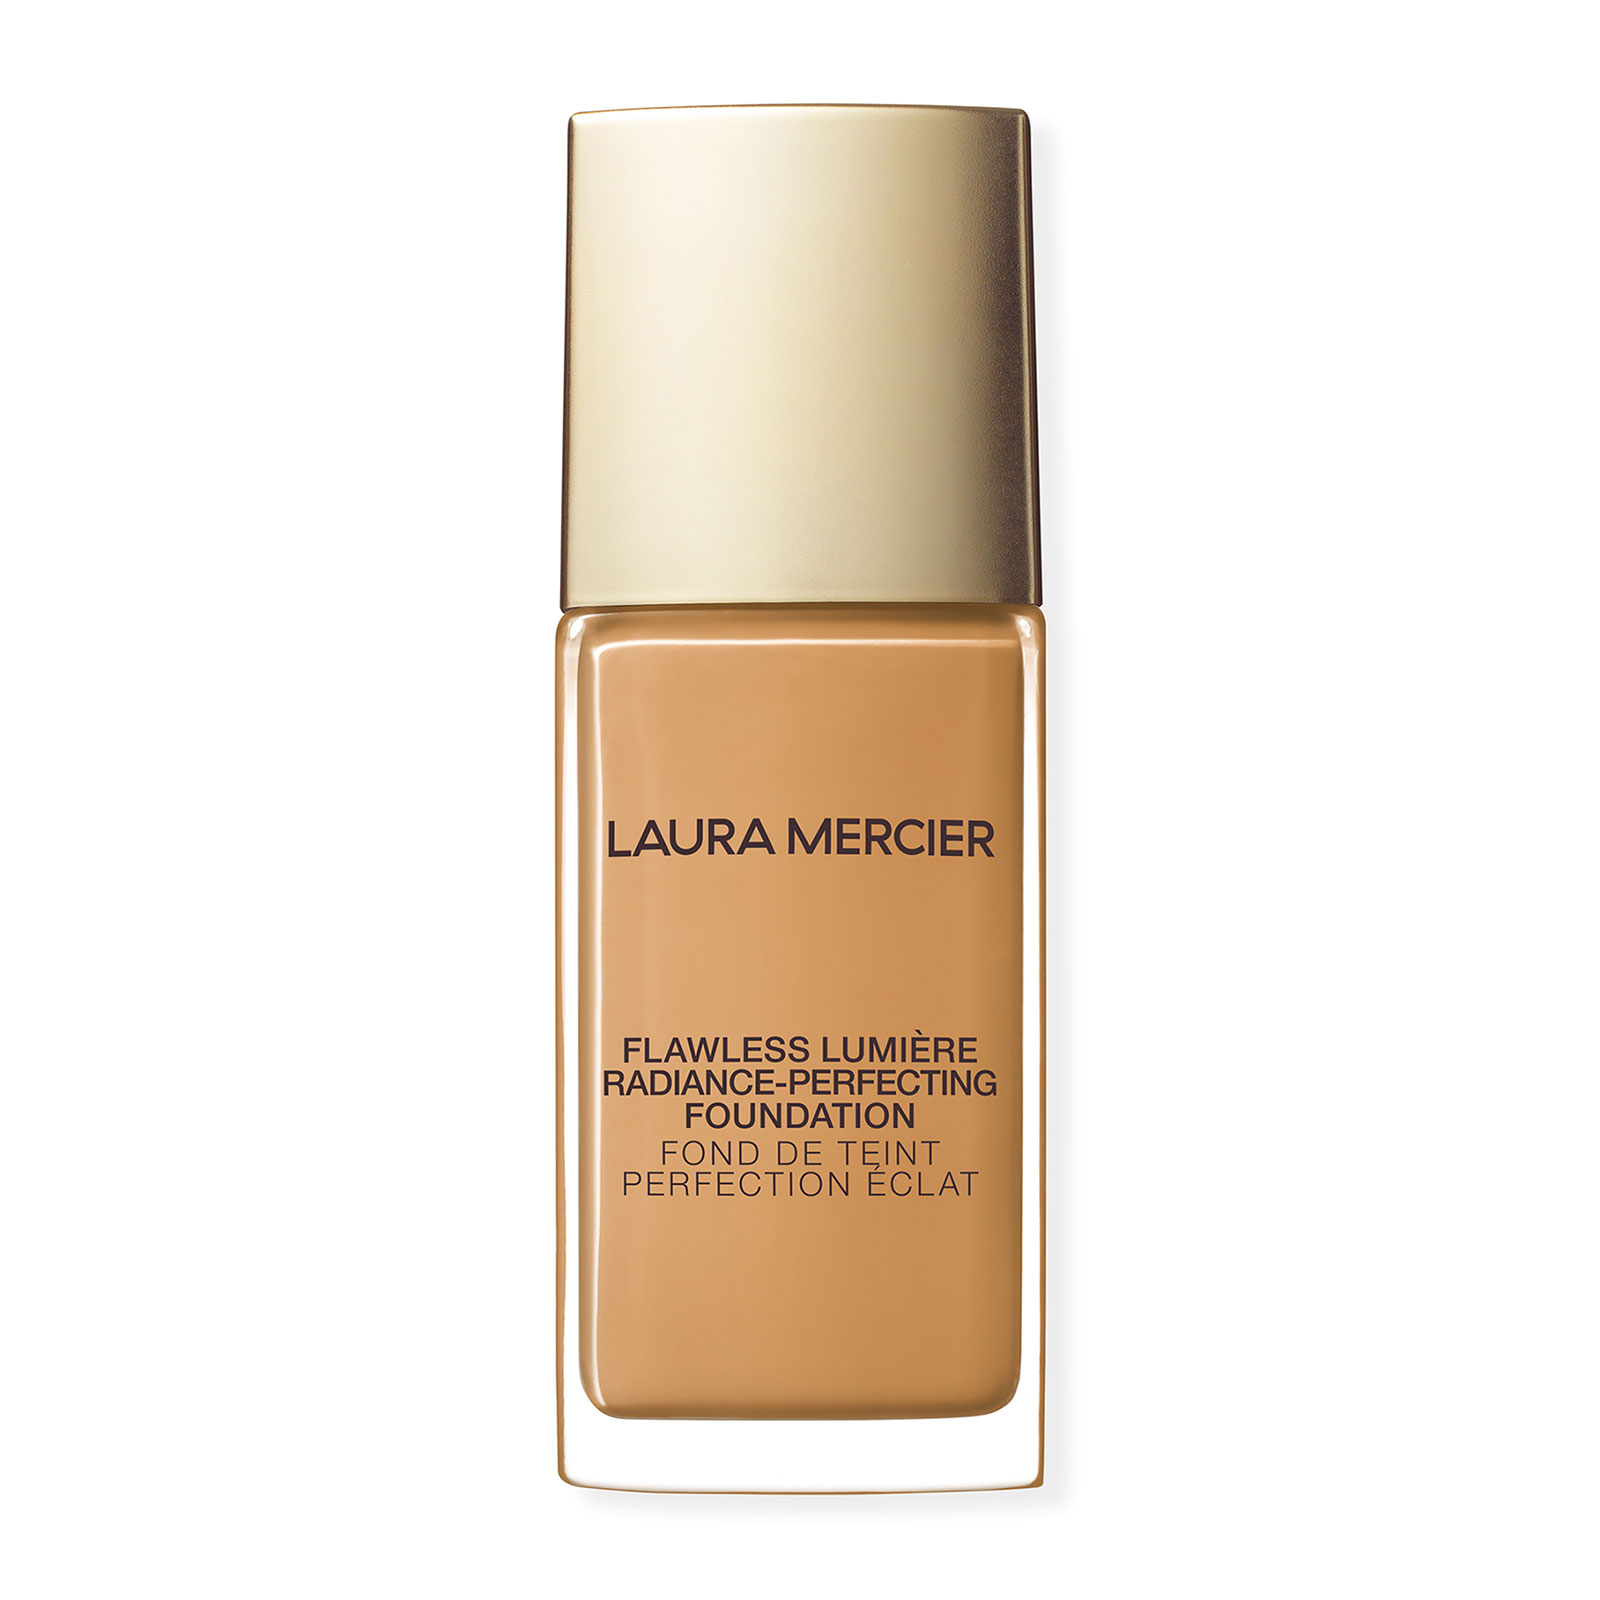 Laura Mercier Flawless Lumiere Radiance-Perfecting Foundation 30Ml 2N2 Linen